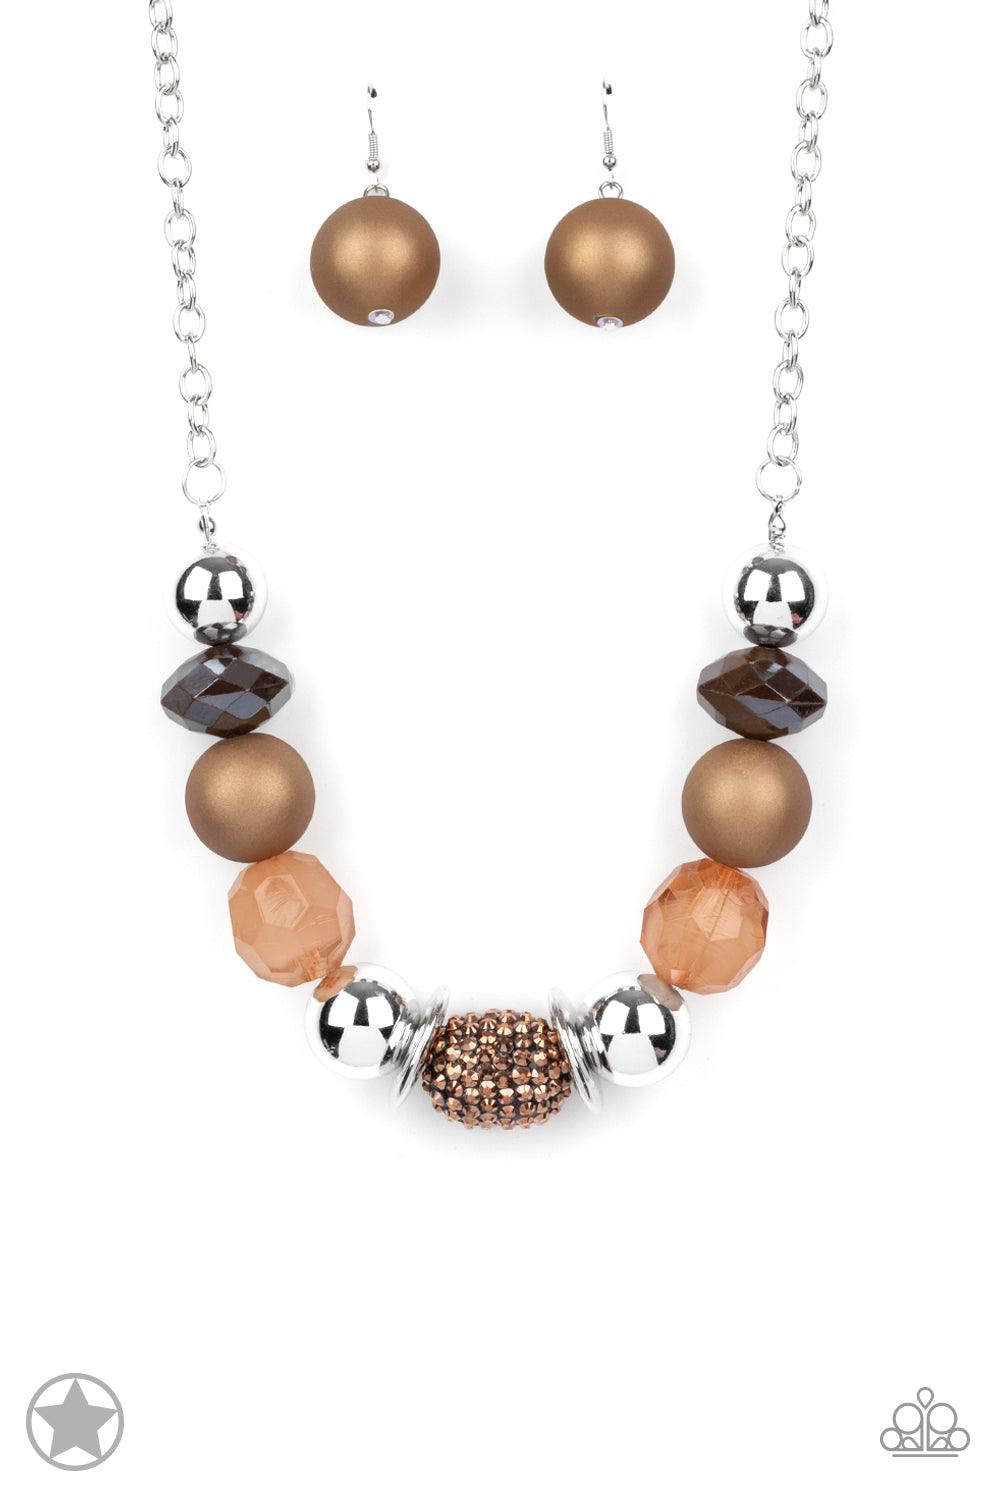 Paparazzi Accessories A Warm Welcome - Brown Warm beads in shades of brown and copper with reflective faceted edges and varying glazed finishes are offset by two shiny silver beads. An oblong bead studded with copper-toned rhinestones adds a dramatic acce